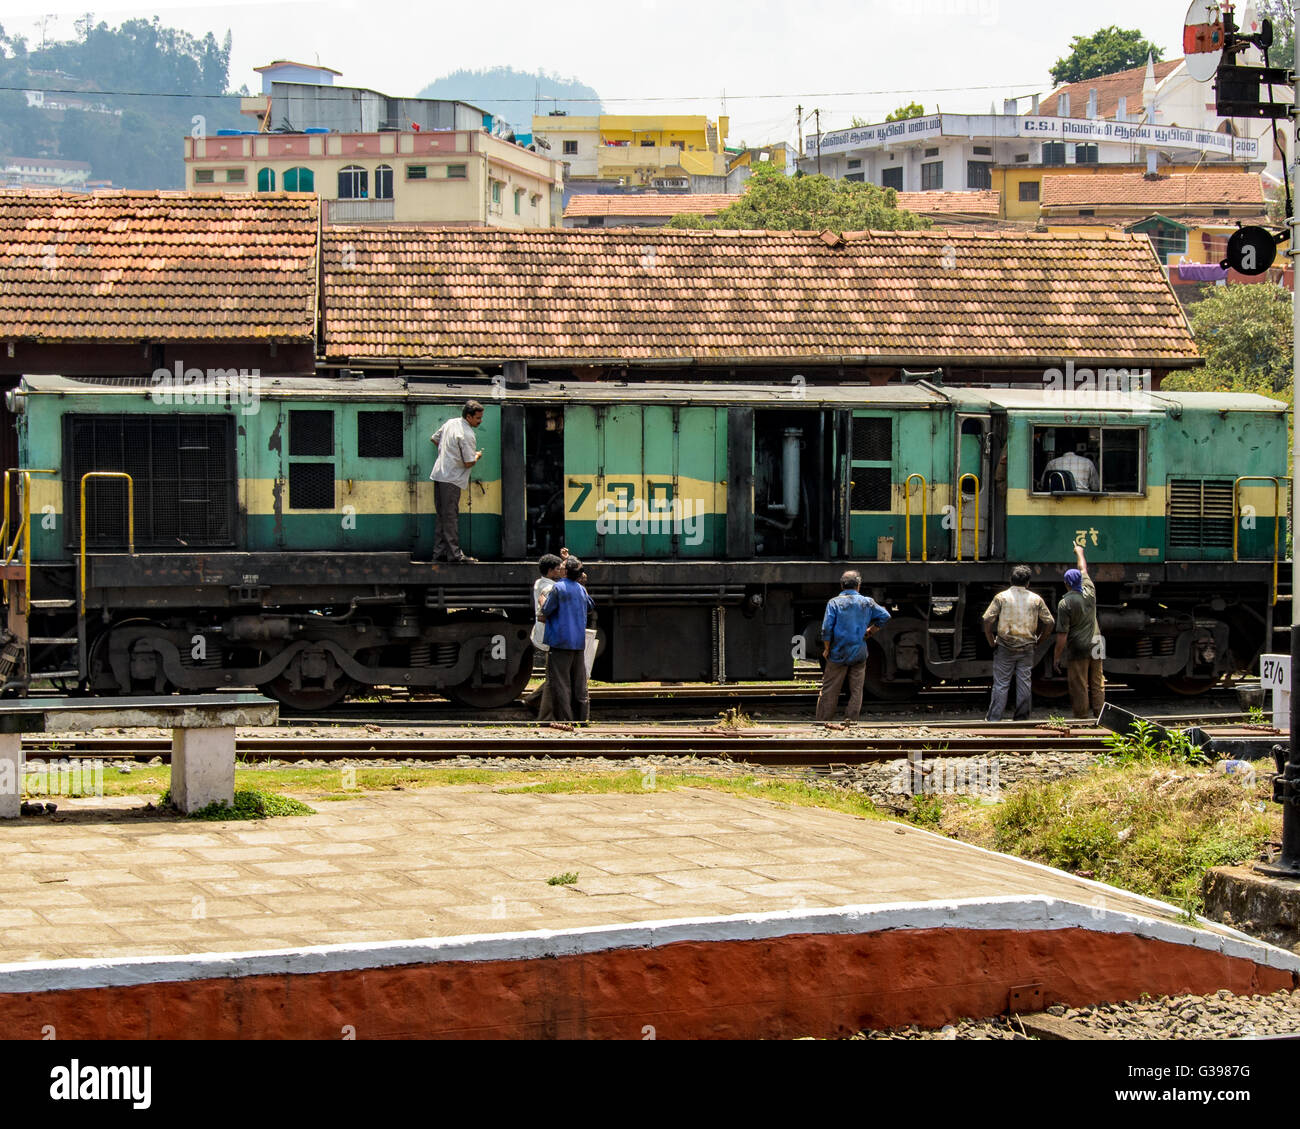 Coonoor railway engine and workers Southern India Stock Photo